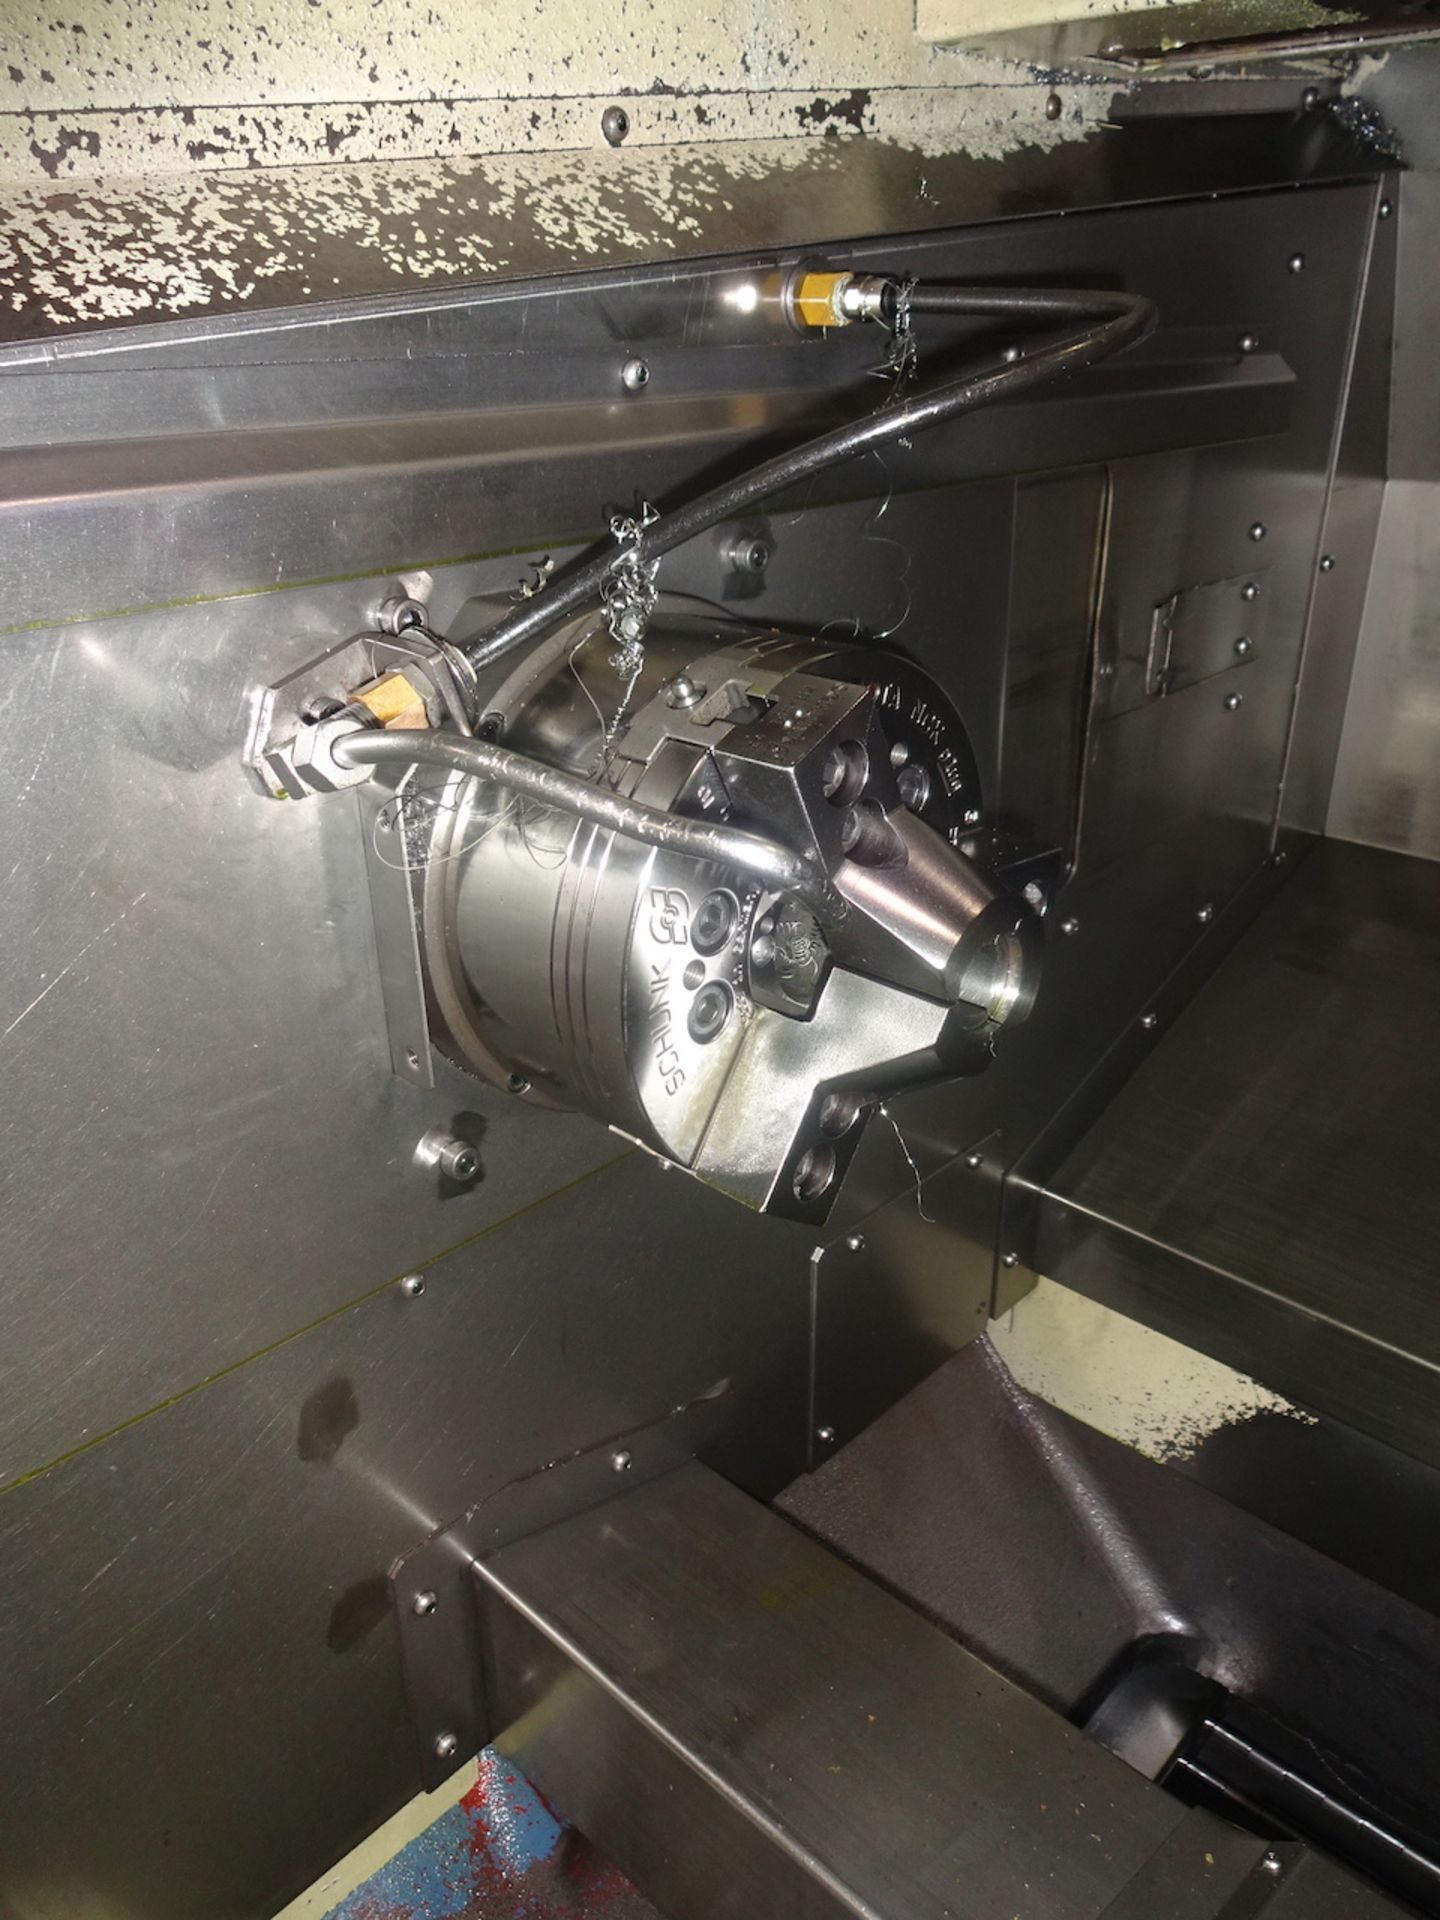 2004 MIYANO MODEL LZ-01R CNC 2-AXIS TURNING CENTER, S/N LZ1R0270, 6 IN. 3-JAW CHUCK, 12-POSITION - Image 4 of 7